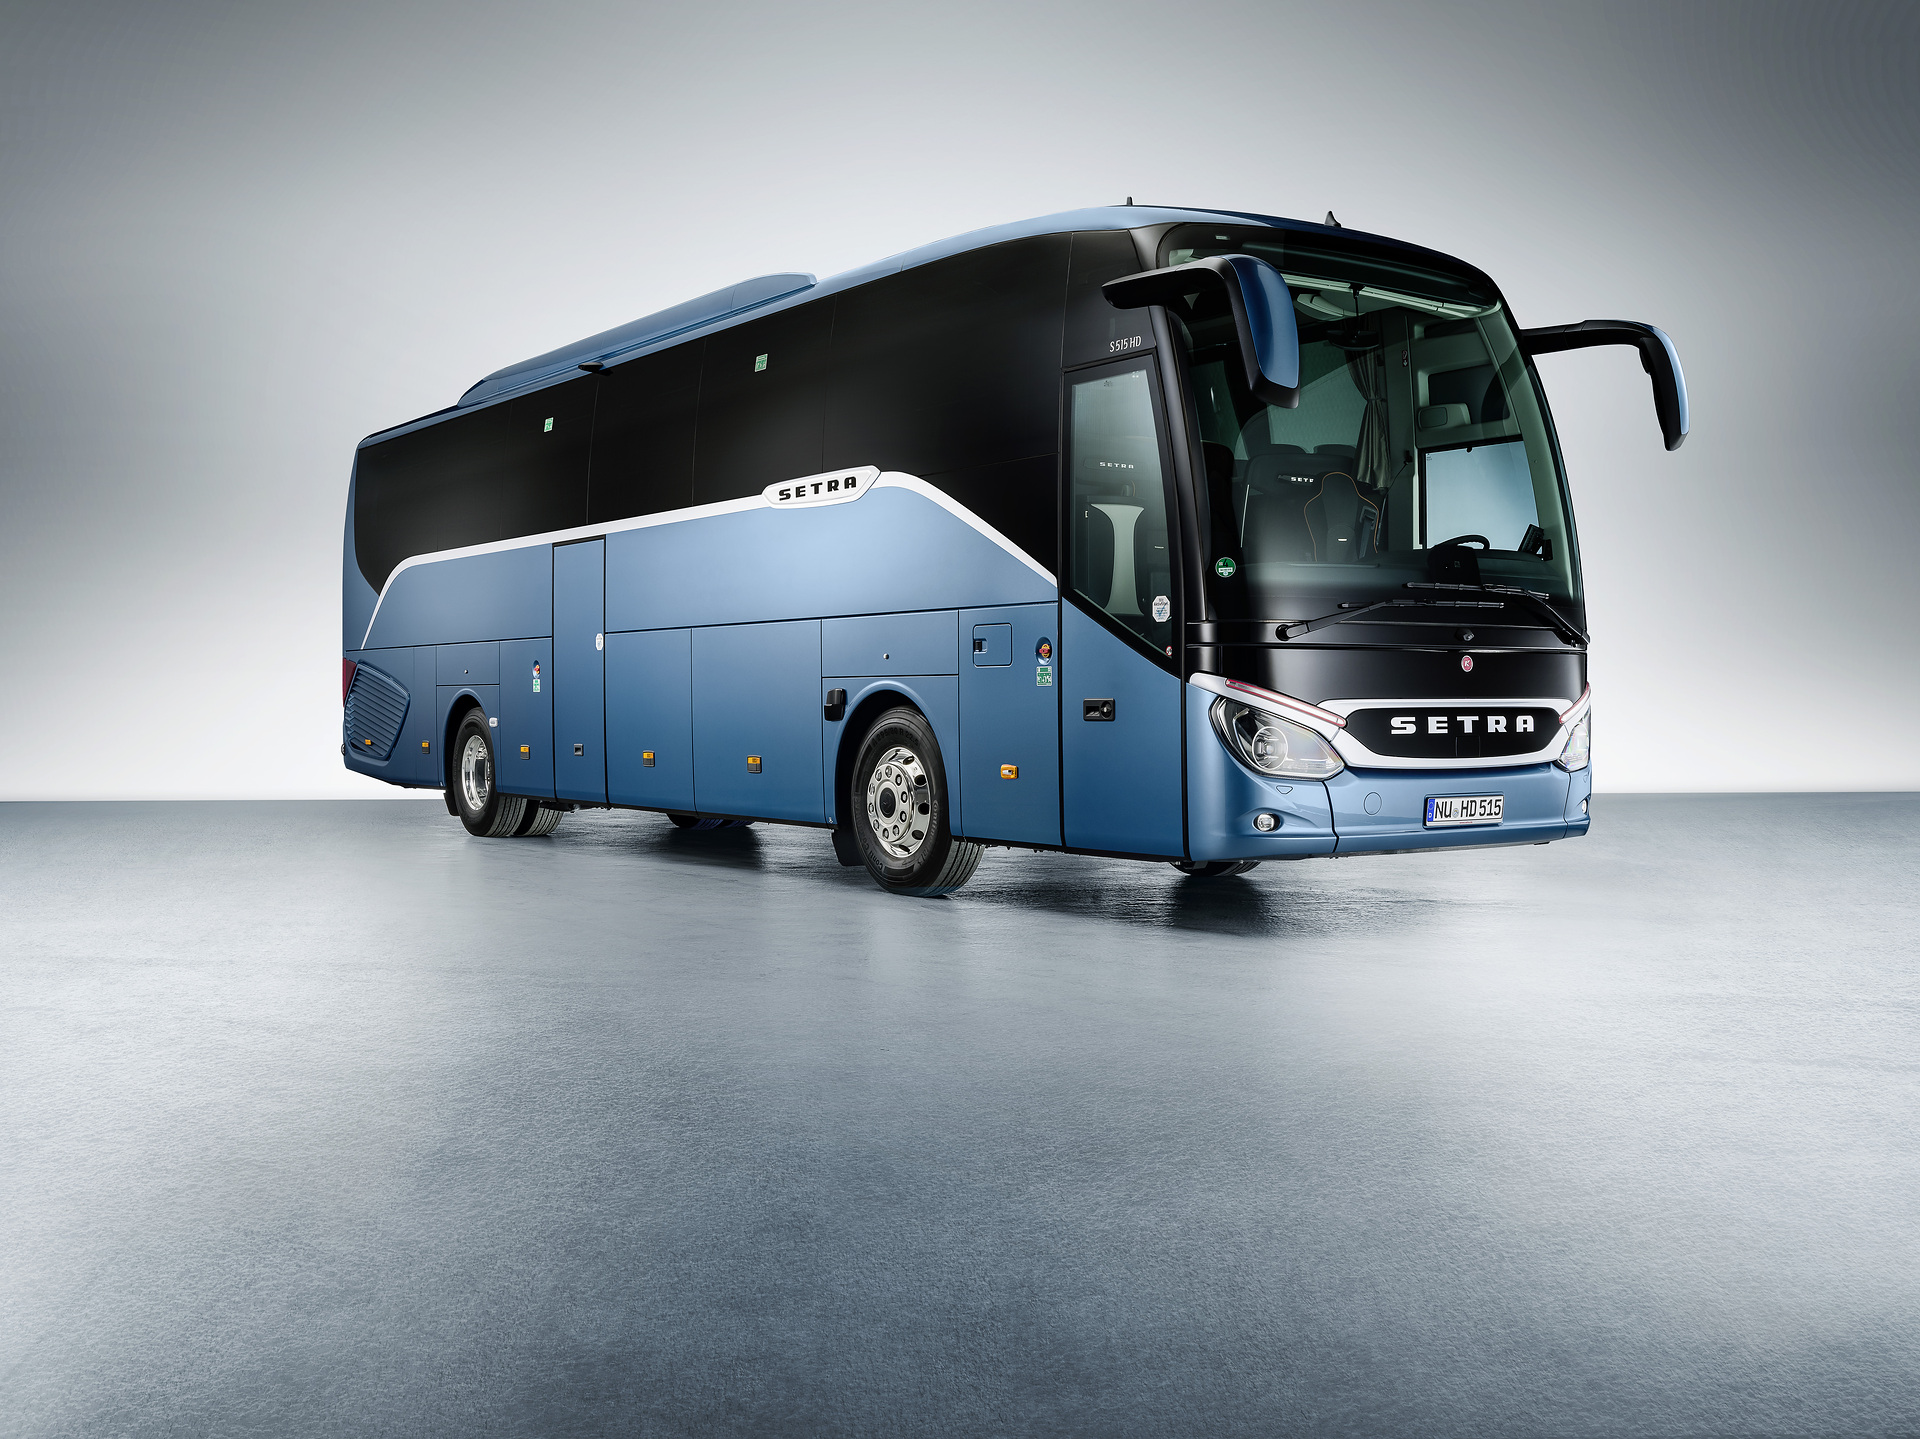 Face in the crowd: Next generation of Setra ComfortClass and TopClass coaches